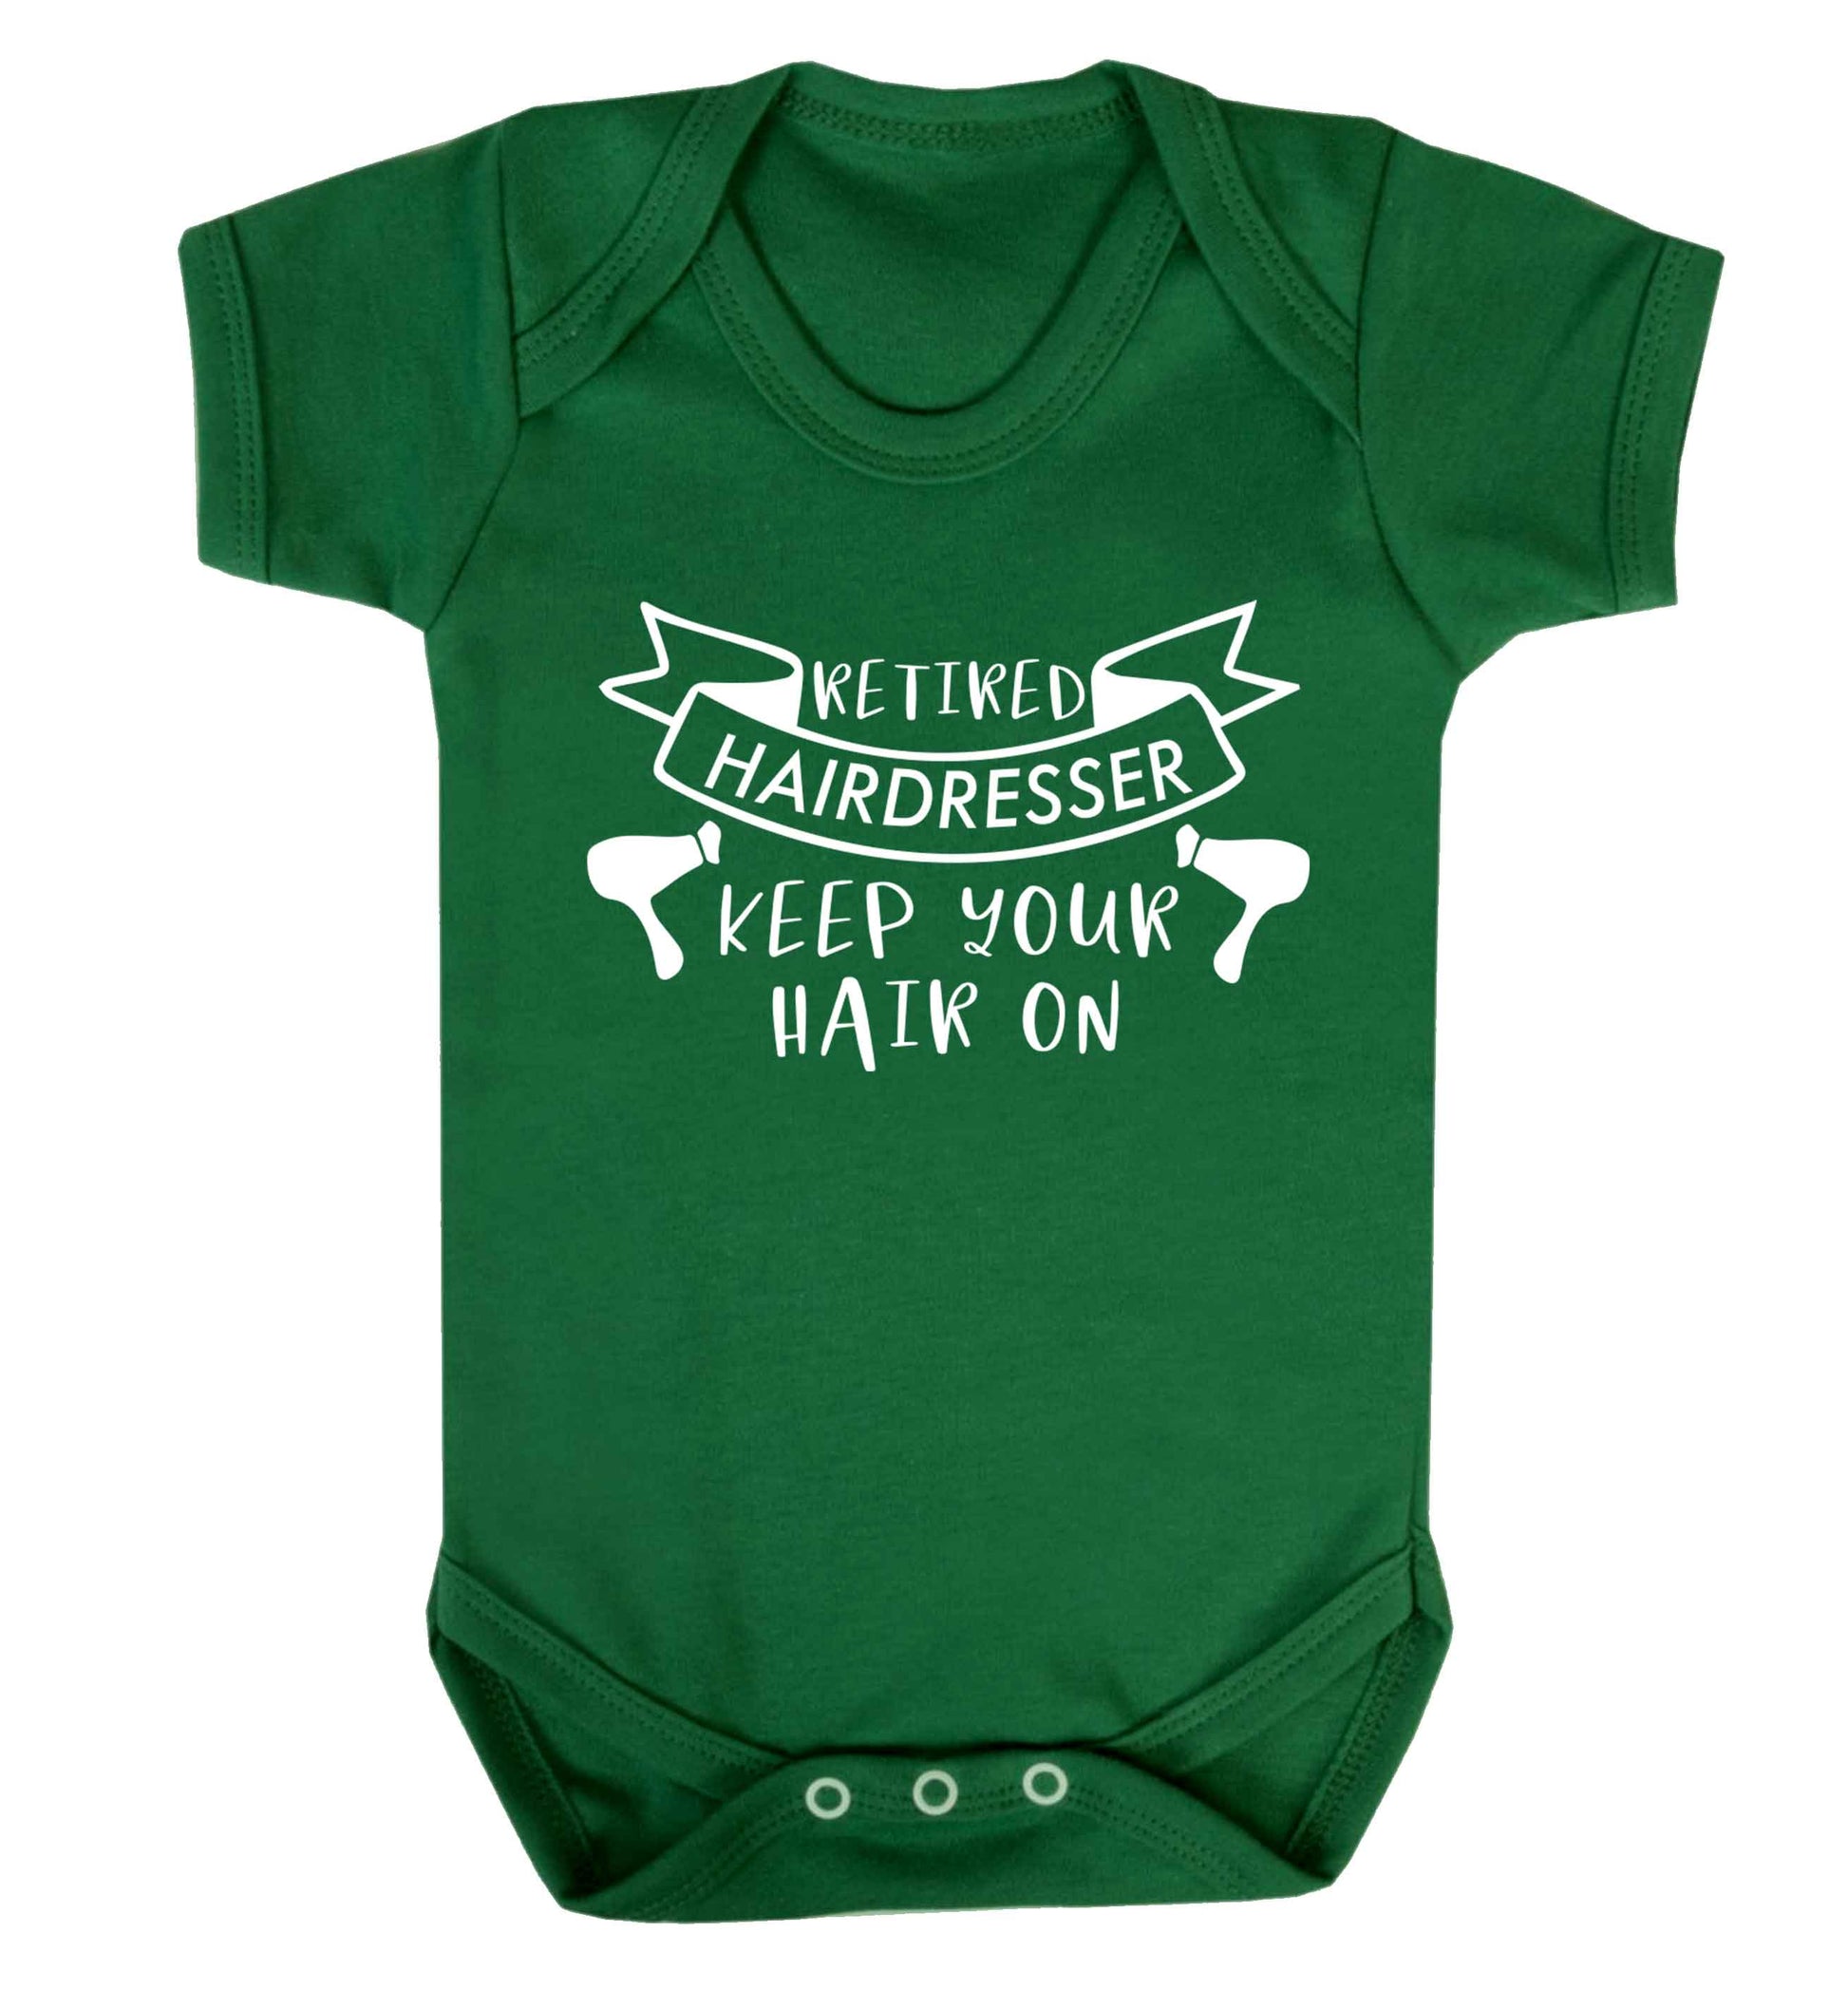 Retired hairdresser keep your hair on Baby Vest green 18-24 months